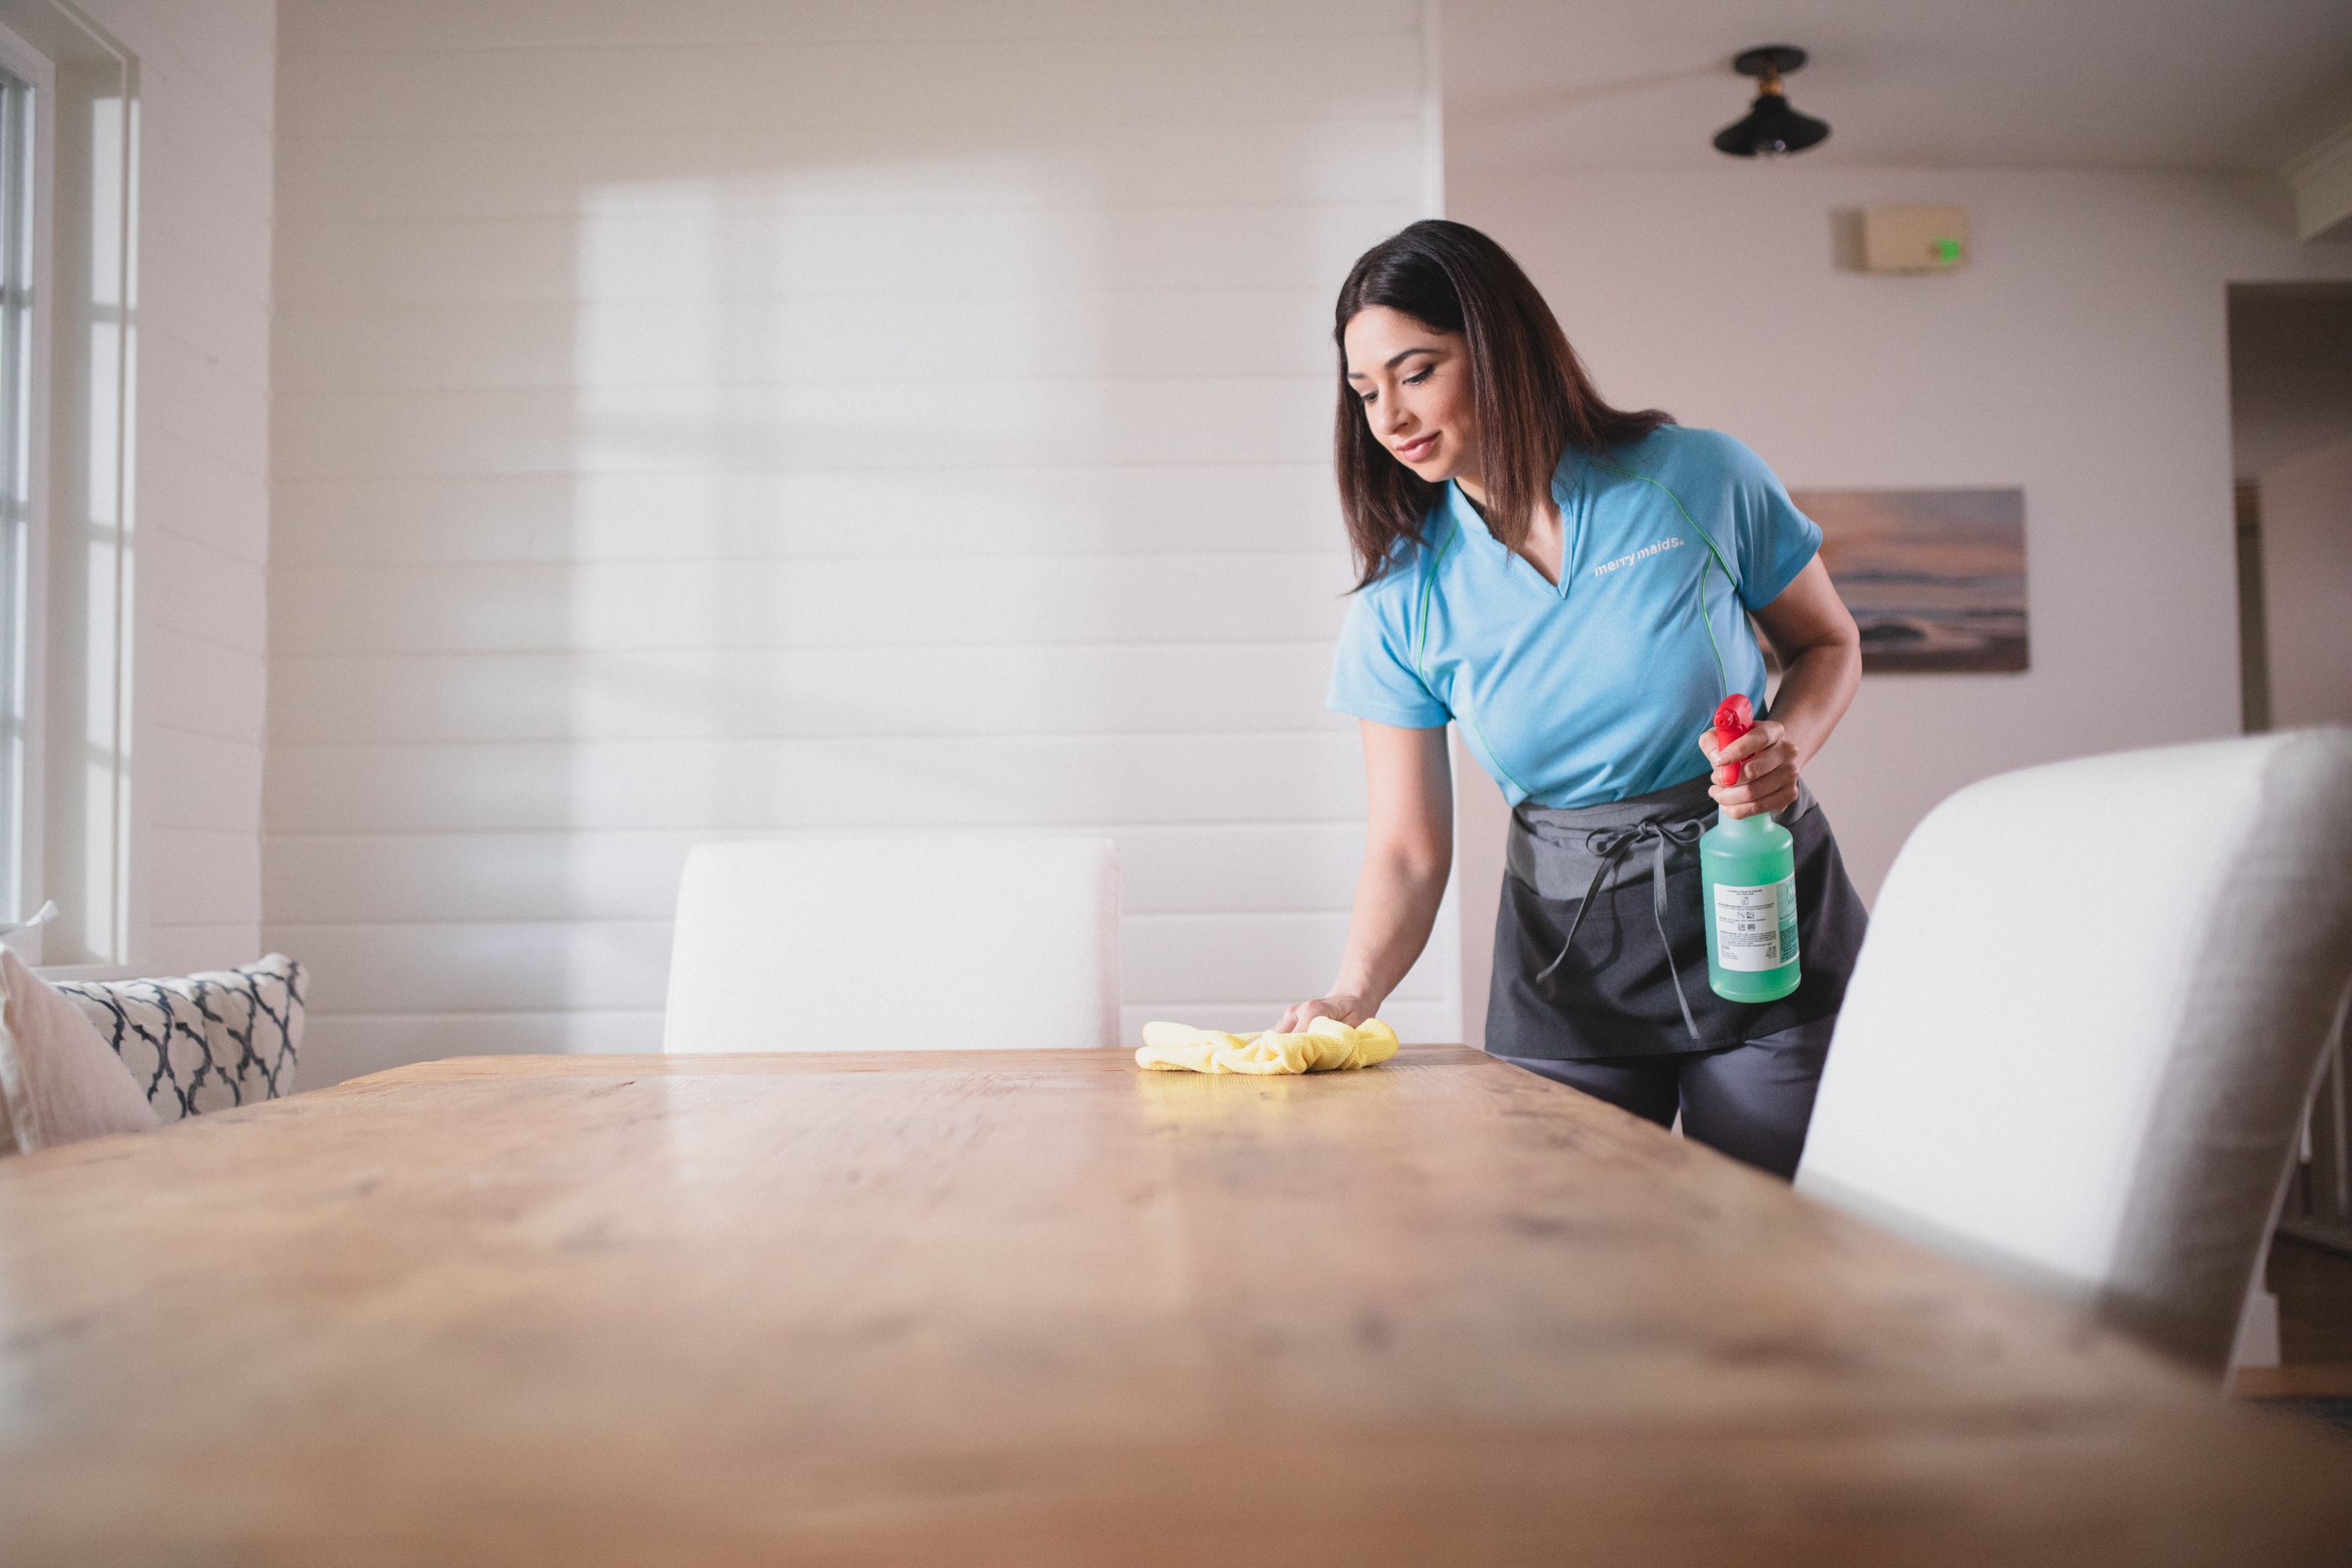  A Merry Maids professional carrying out cleaning services in Collegeville